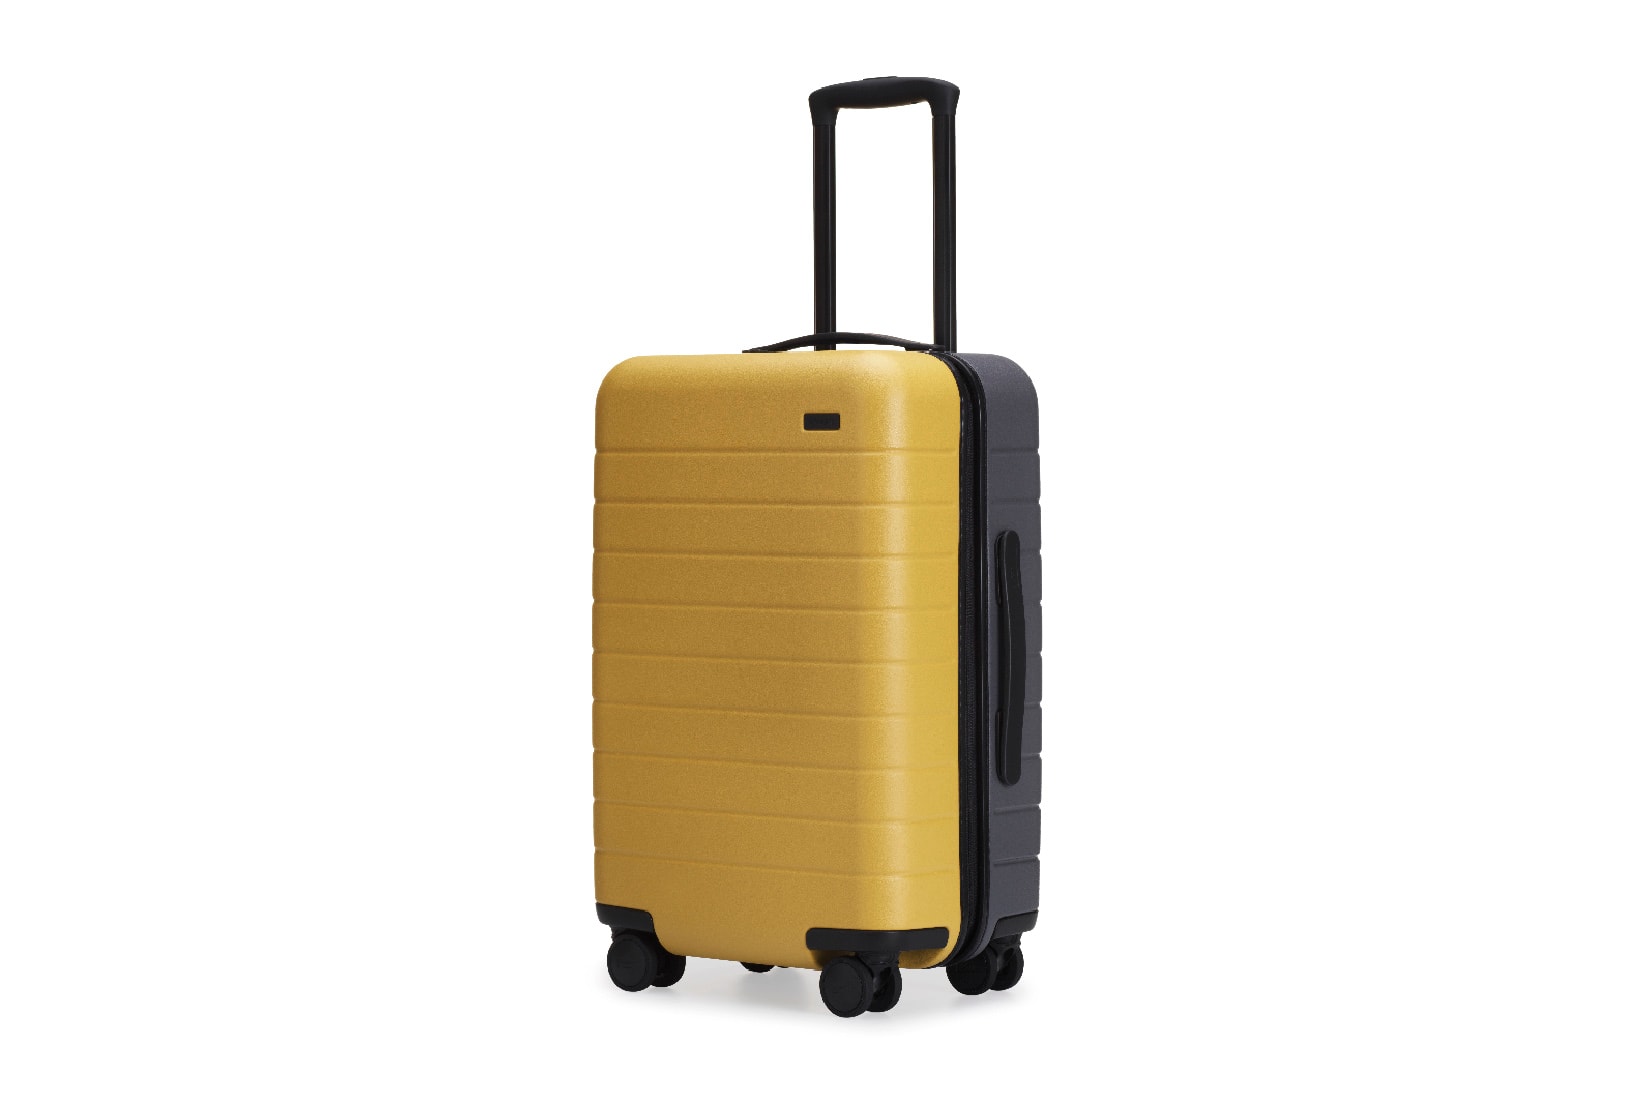 Away travel coordinate collection 2018 dual-tone suitcases